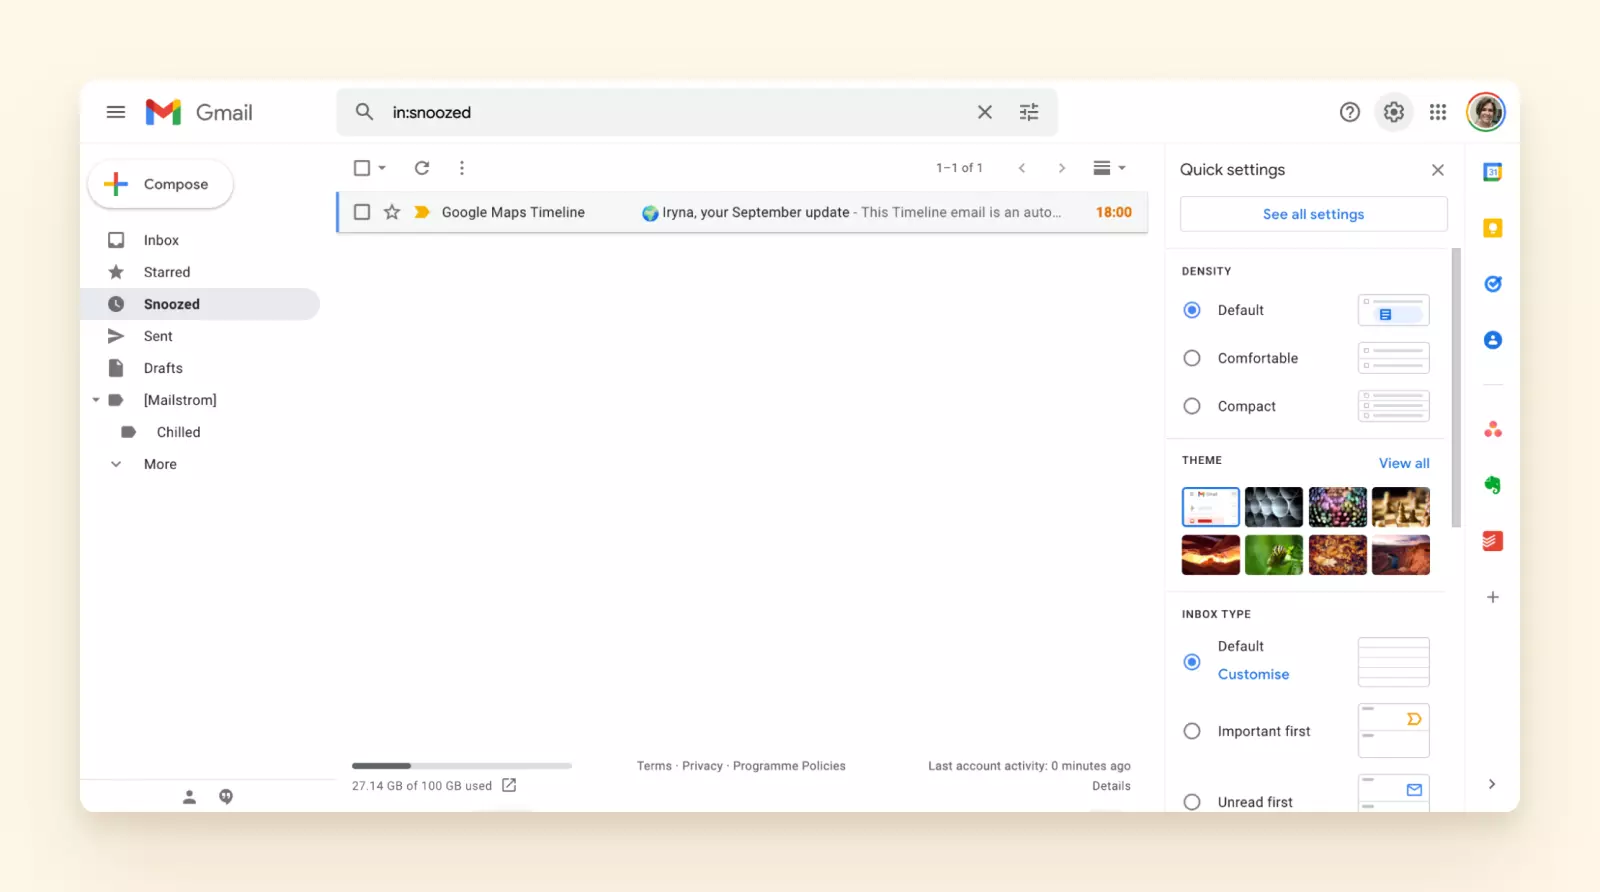 Google Workspace email interface